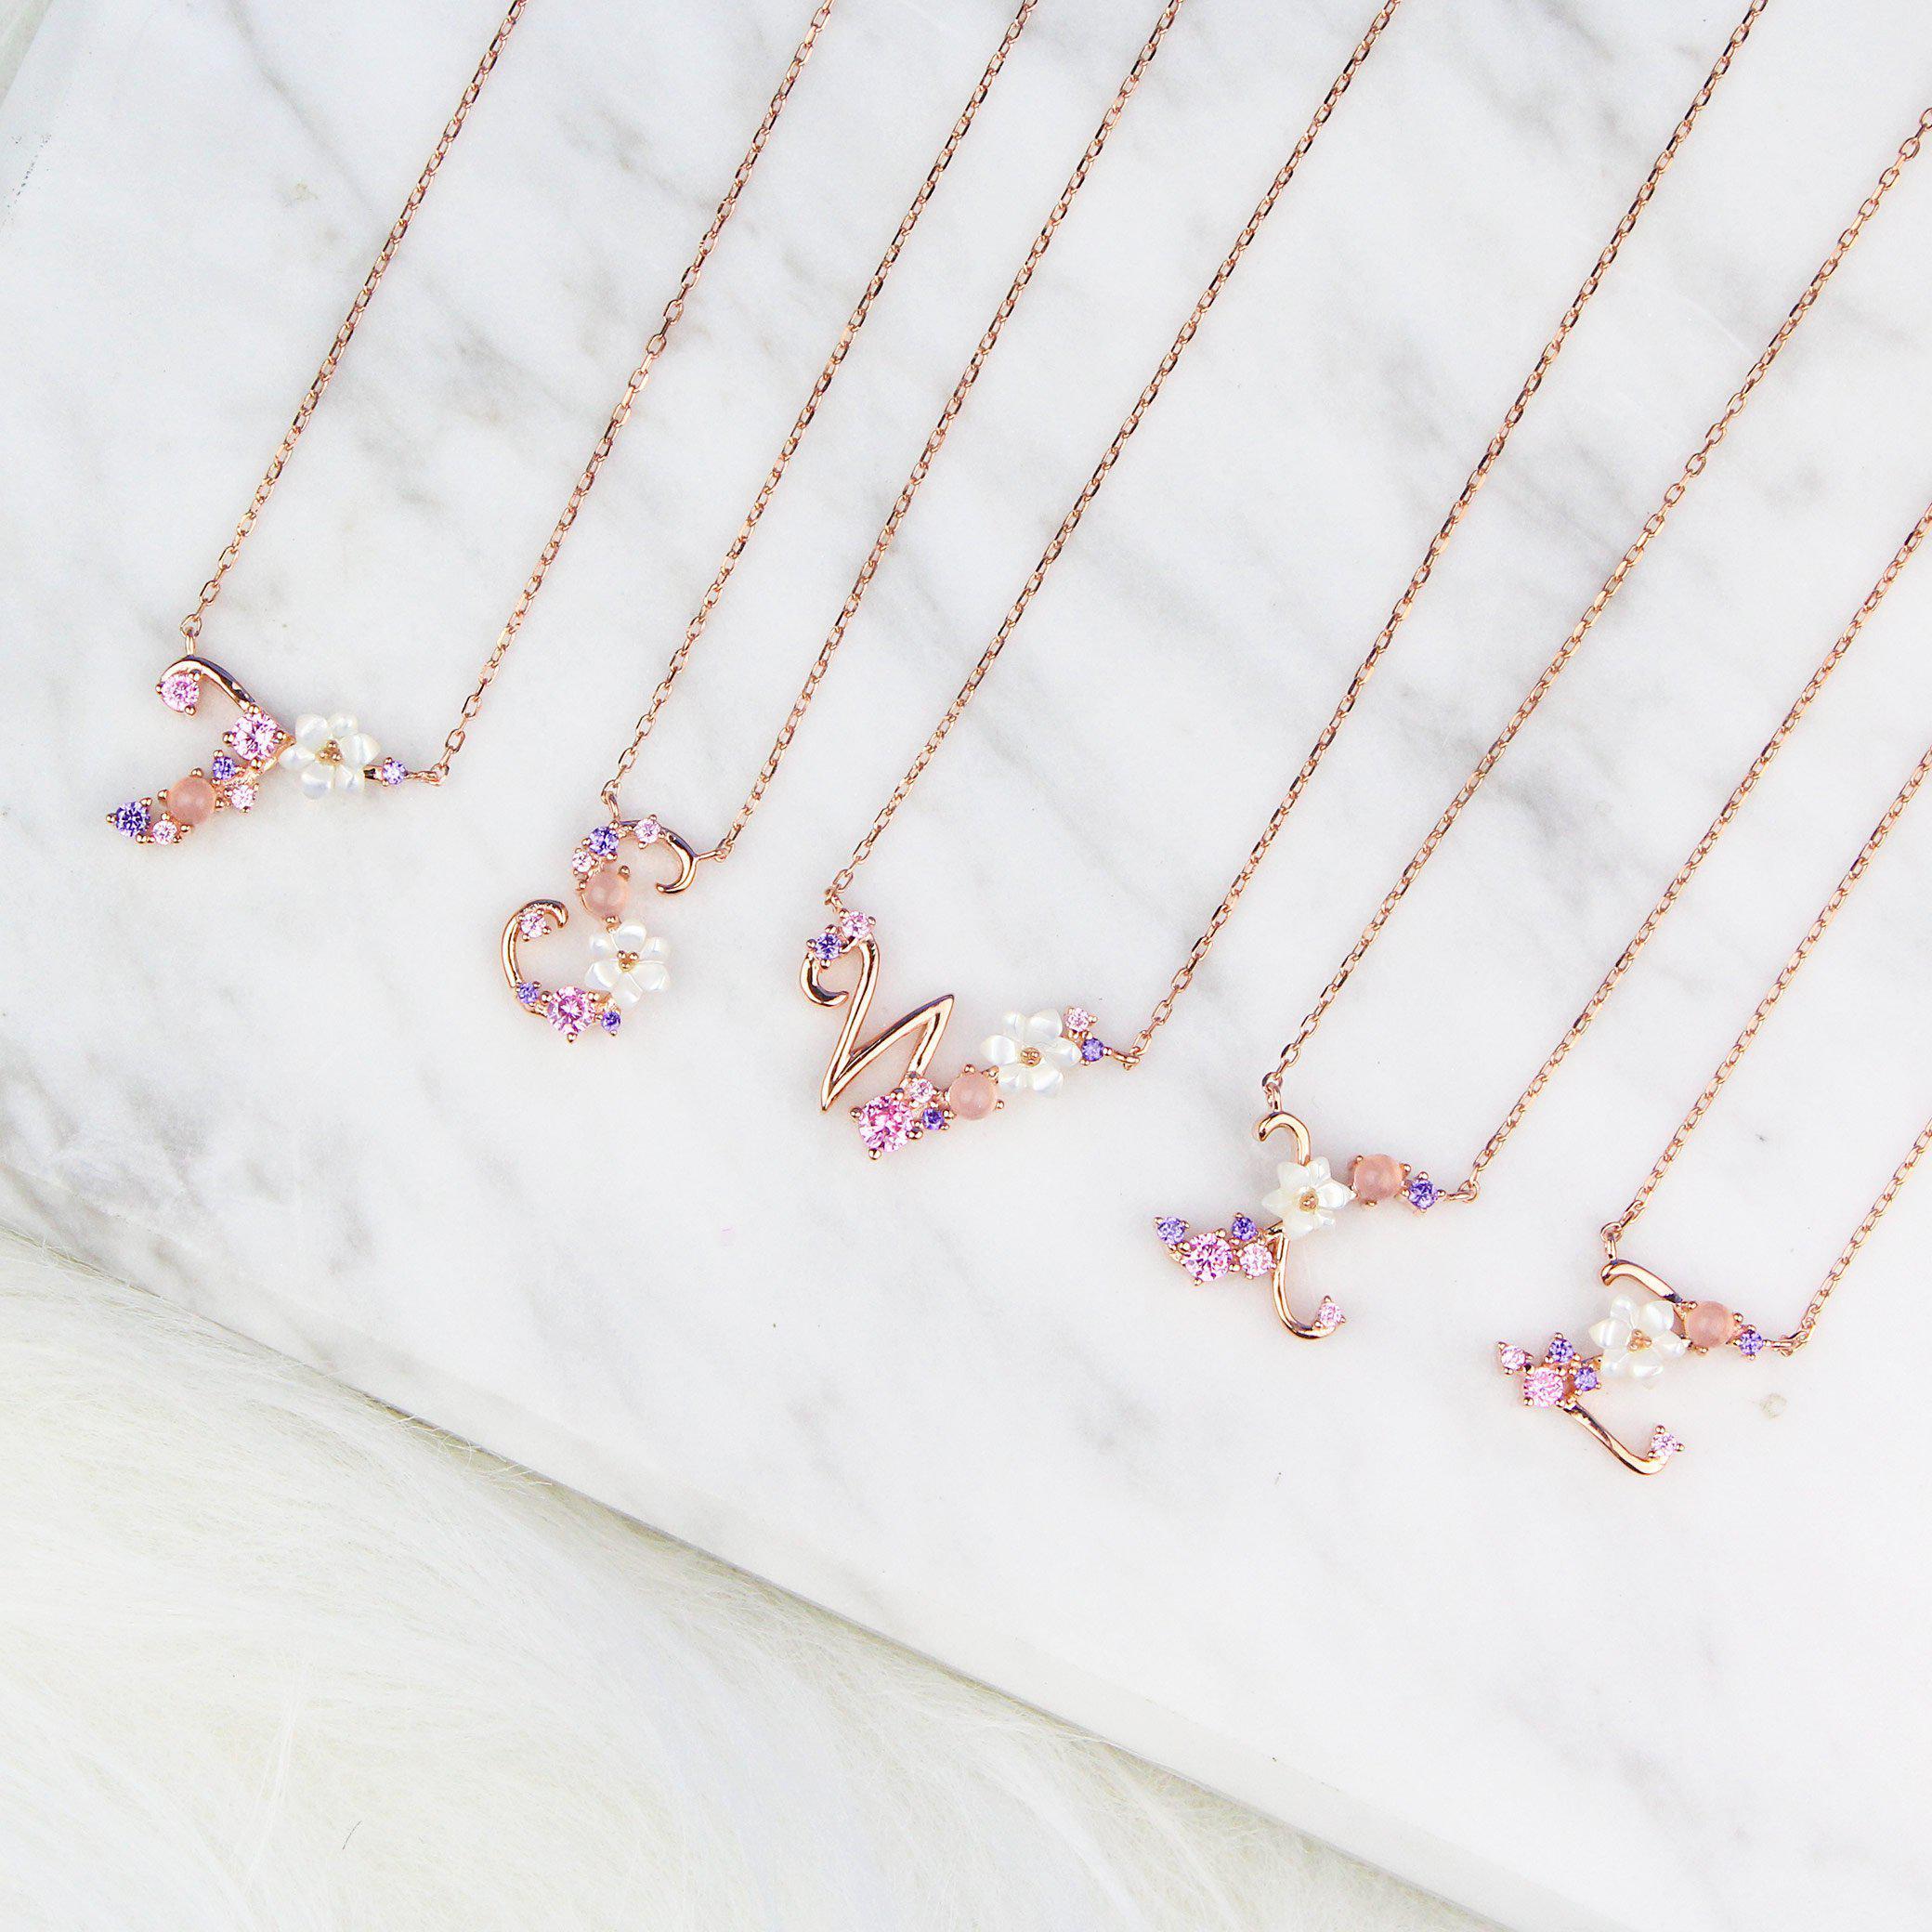 Floral Letter Necklace | Whimsical Initial Necklace | Dainty Gems ...